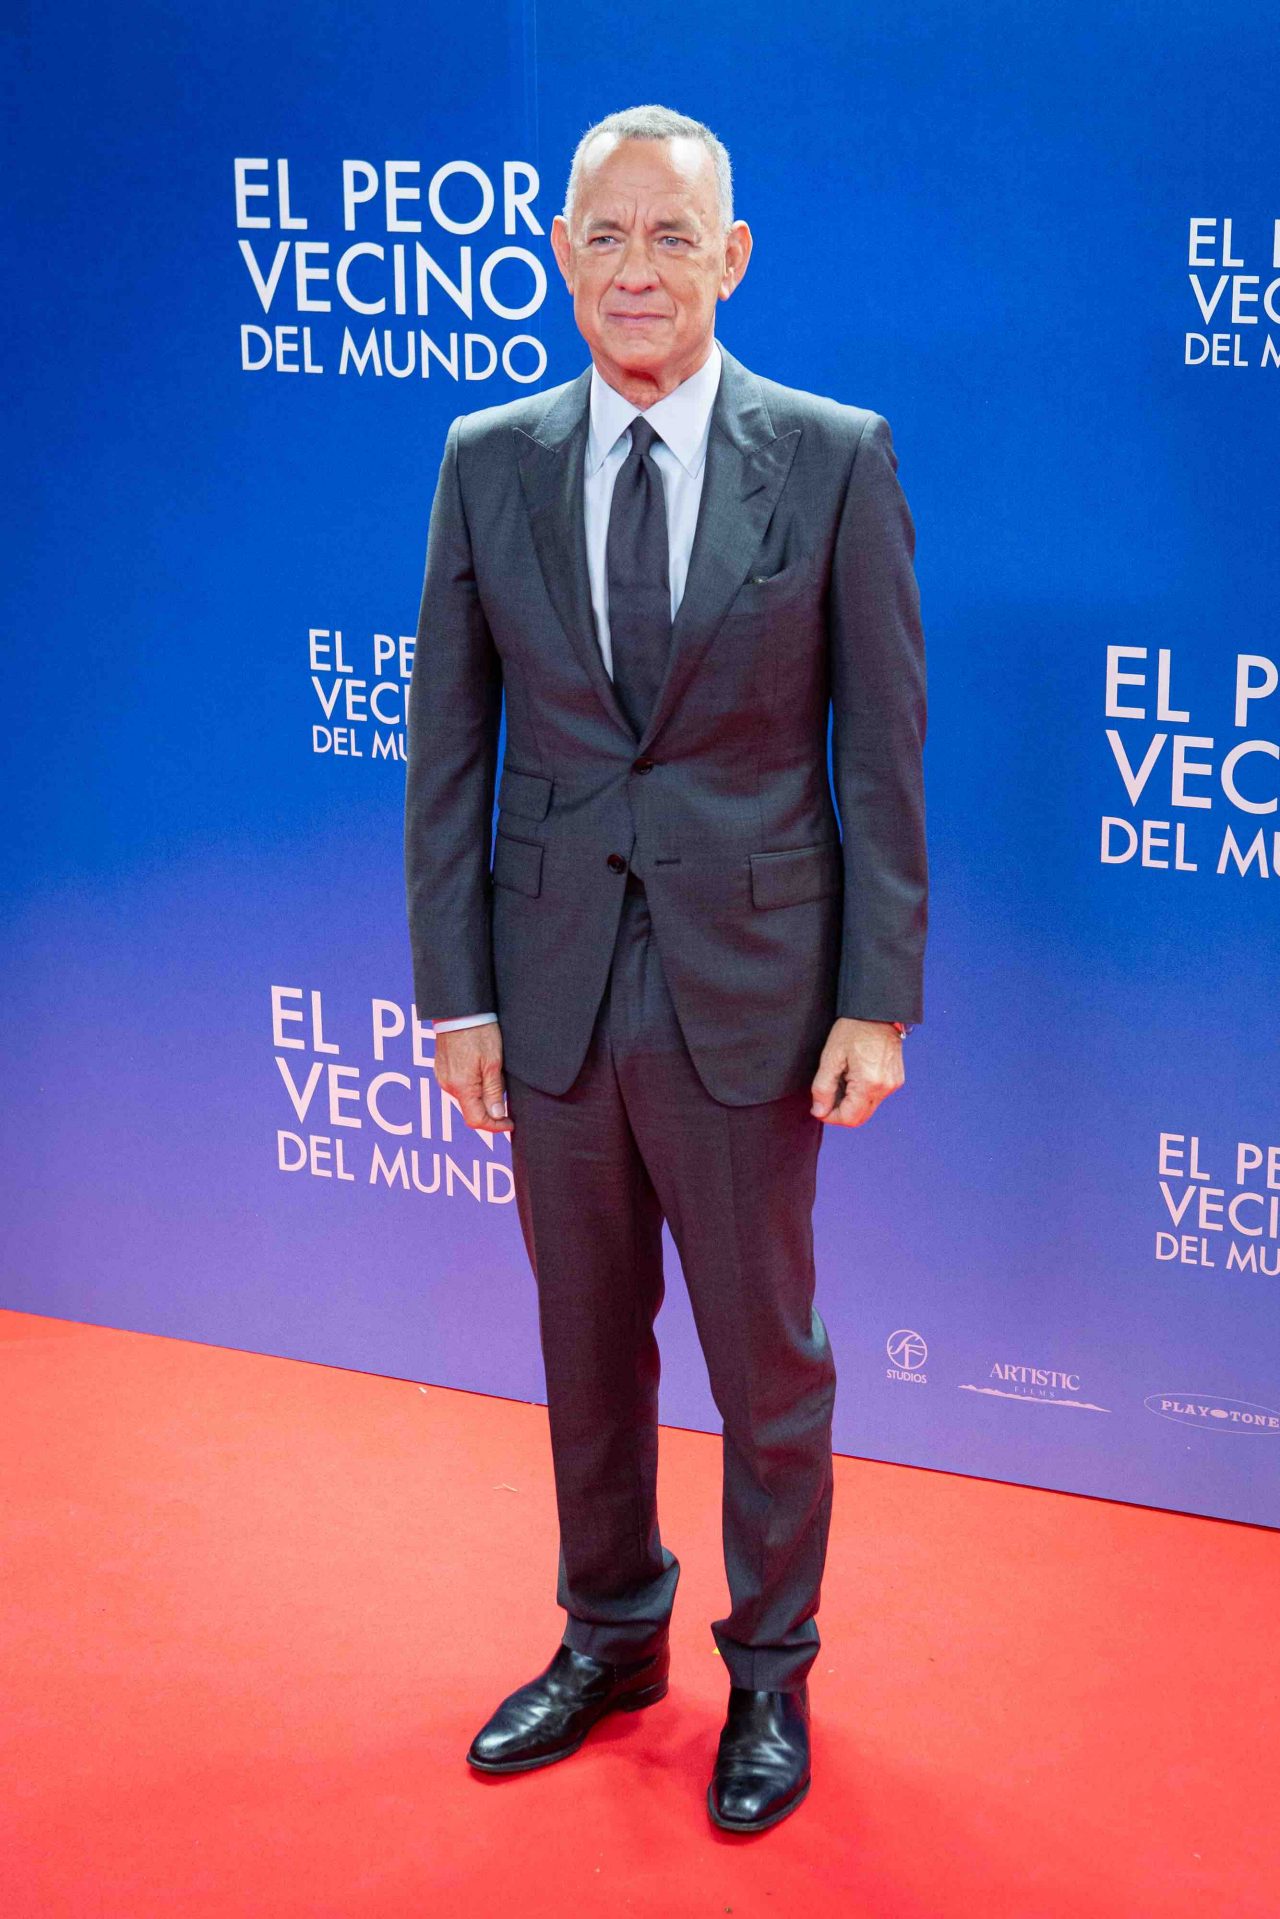 MADRID, SPAIN - DECEMBER 12: US actor Tom anks attends the premiere of "El Peor Vecino Del Mundo" at Cine Capitol on December 12, 2022 in Madrid, Spain. (Photo by Pablo Cuadra/FilmMagic)